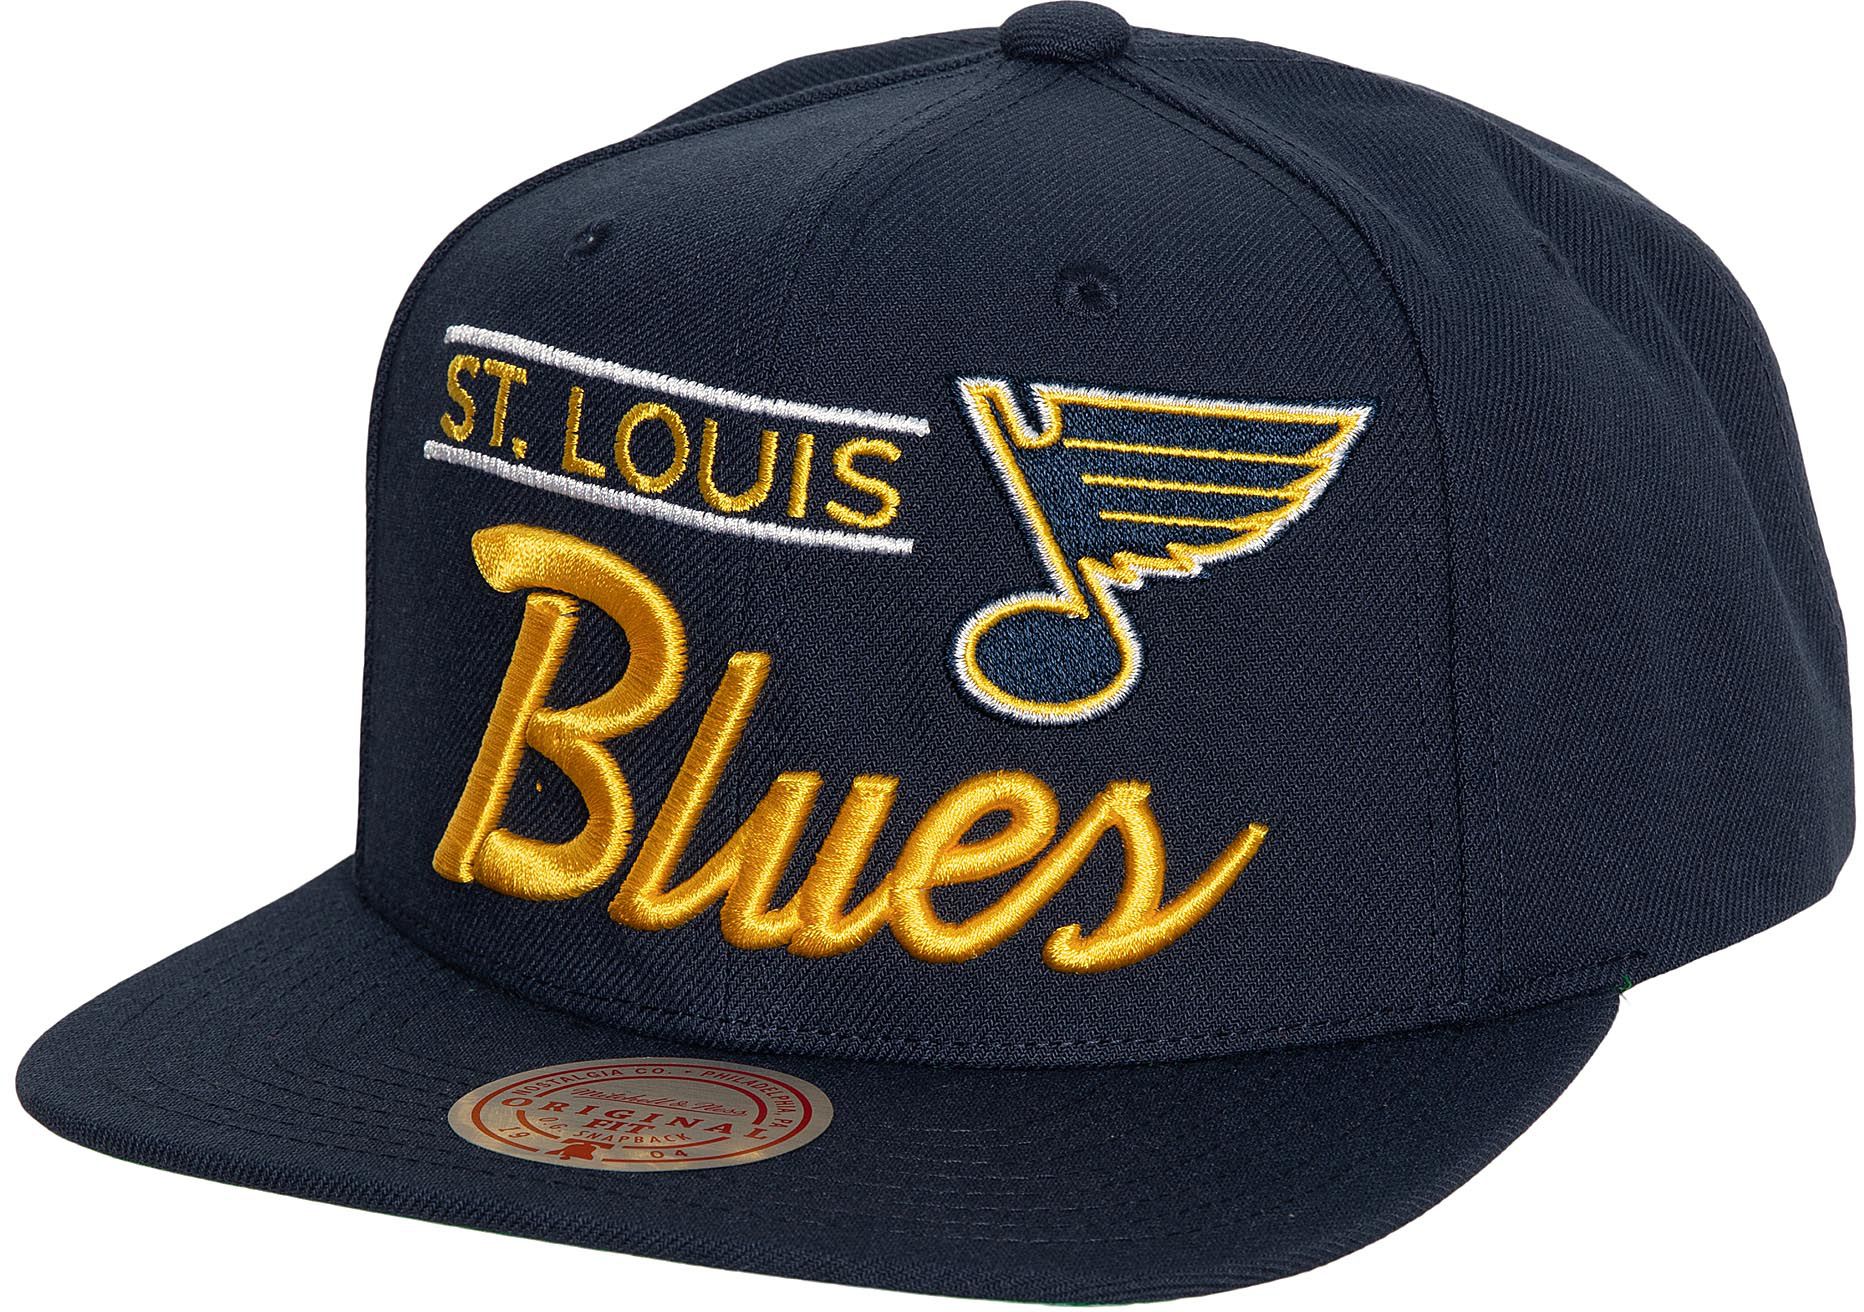 MITCHELL & NESS ST. LOUIS BLUES '22-'23 SPECIAL EDITION LOCKUP SNAPBACK ADJUSTABLE HAT INTERNATIONAL SHIPPING